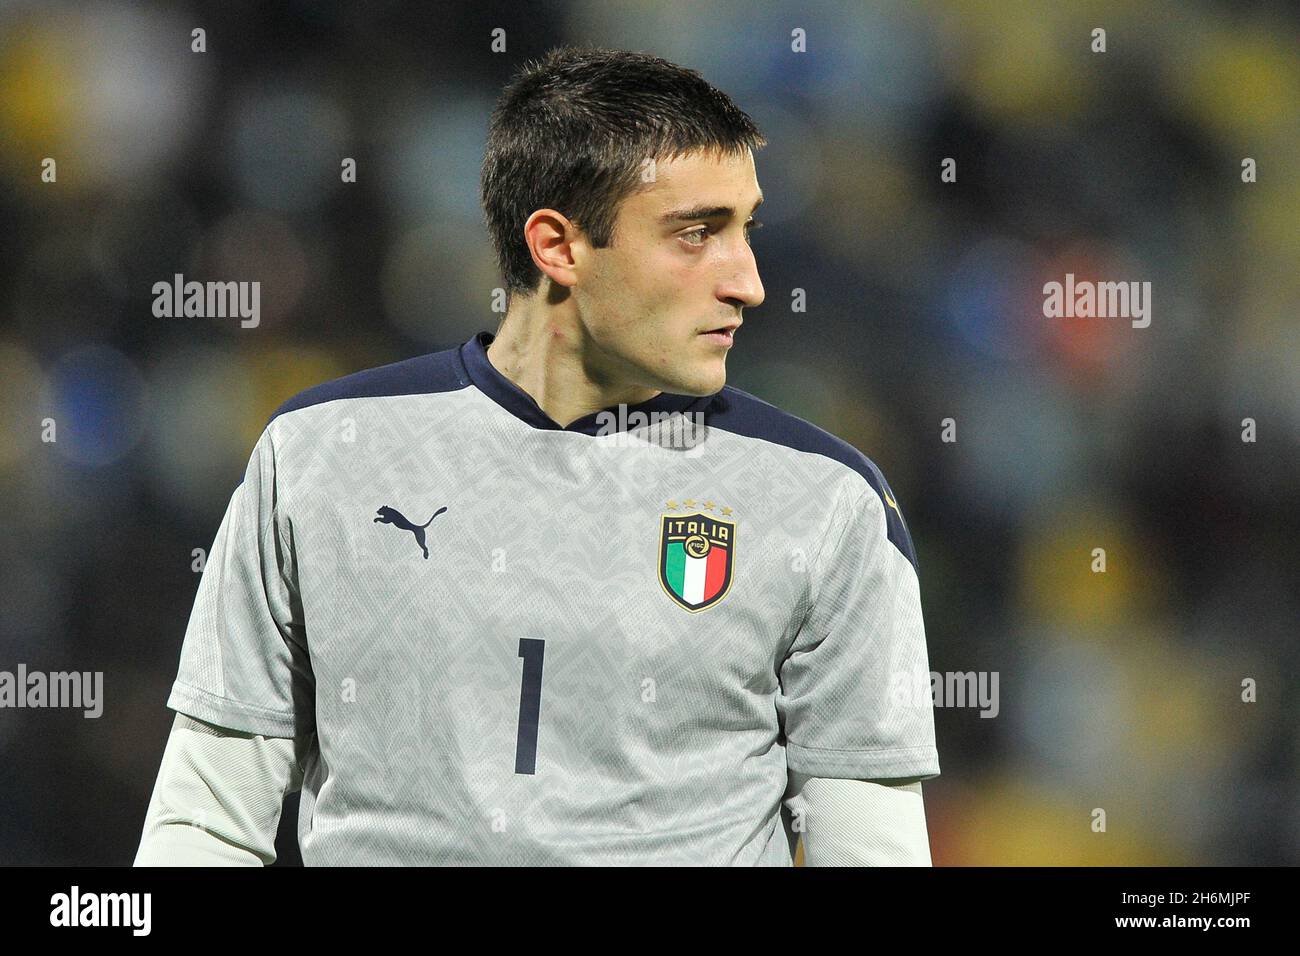 Frosinone, Italy. 16th Nov, 2021. Stefano Turati Italy U21 player, during the friendly match between Italy vs Romania final result 4-2, match played at the Benito Stirpe stadium in Frosinone. Frosinone, Italy, November 16, 2021. (photo by Vincenzo Izzo/Sipa USA) Credit: Sipa USA/Alamy Live News Stock Photo